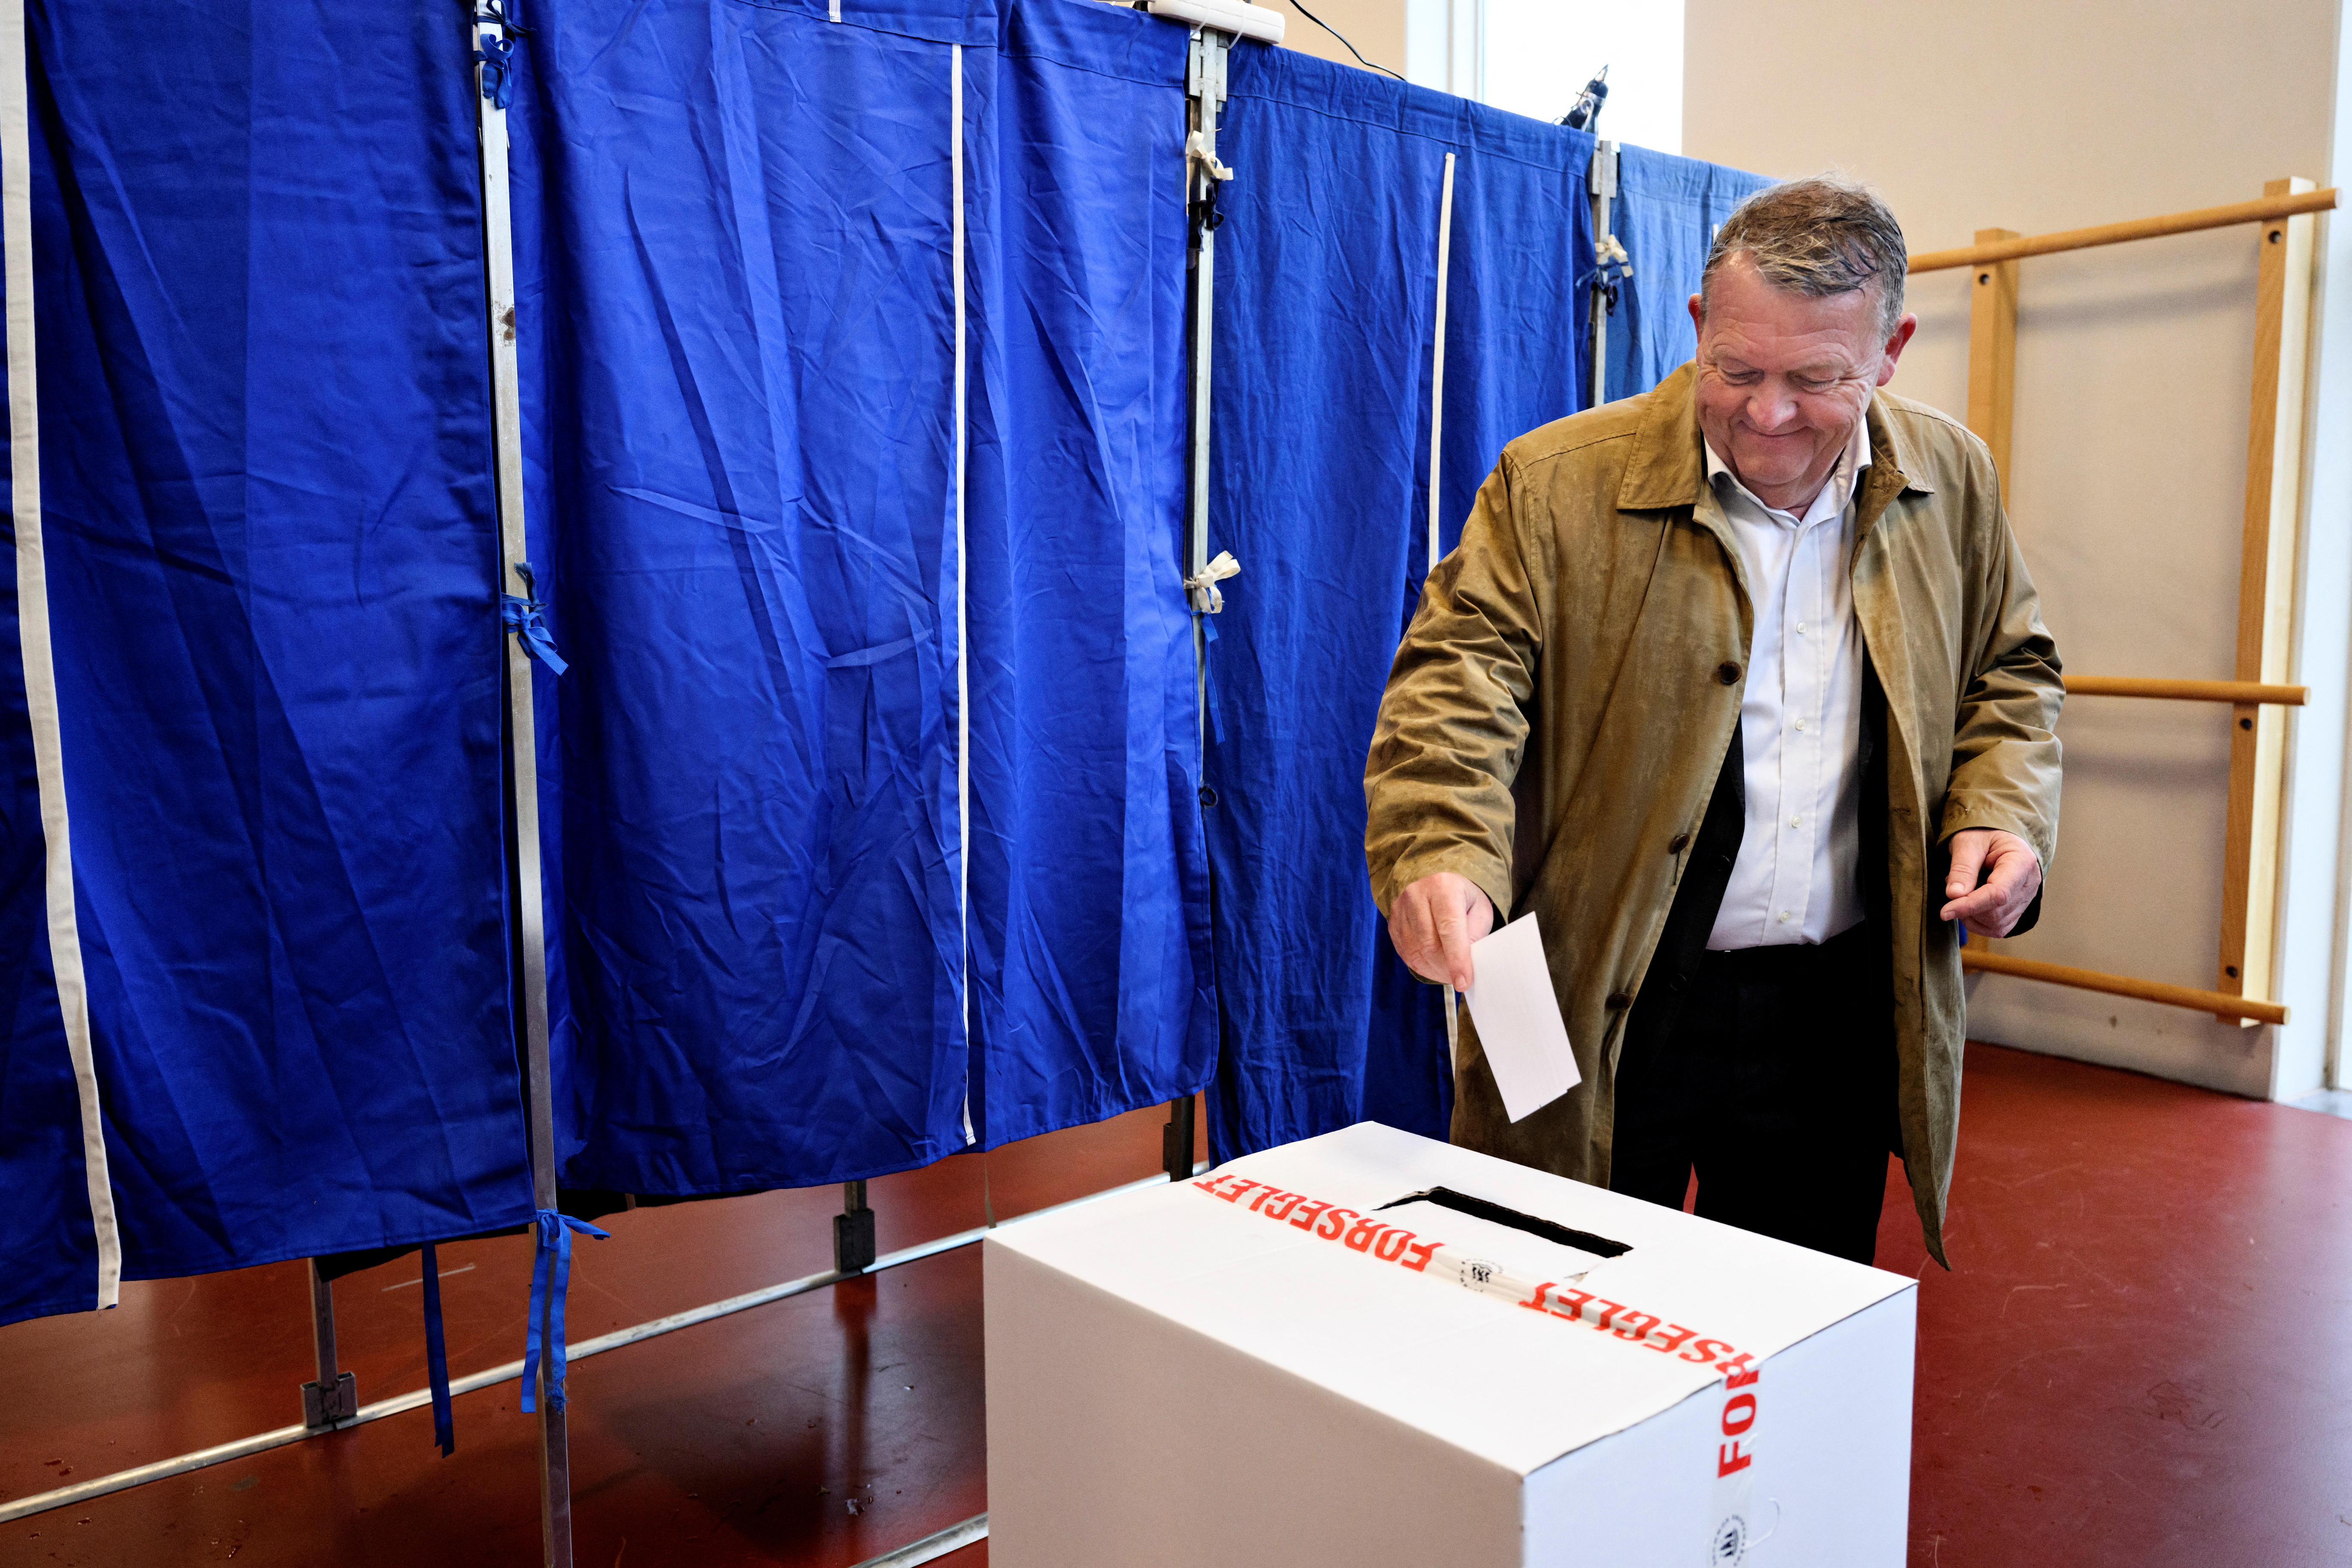 Former Danish prime minister Rasmussen casts his vote during the referendum wether Denmark's participation in the European Union's CSDP